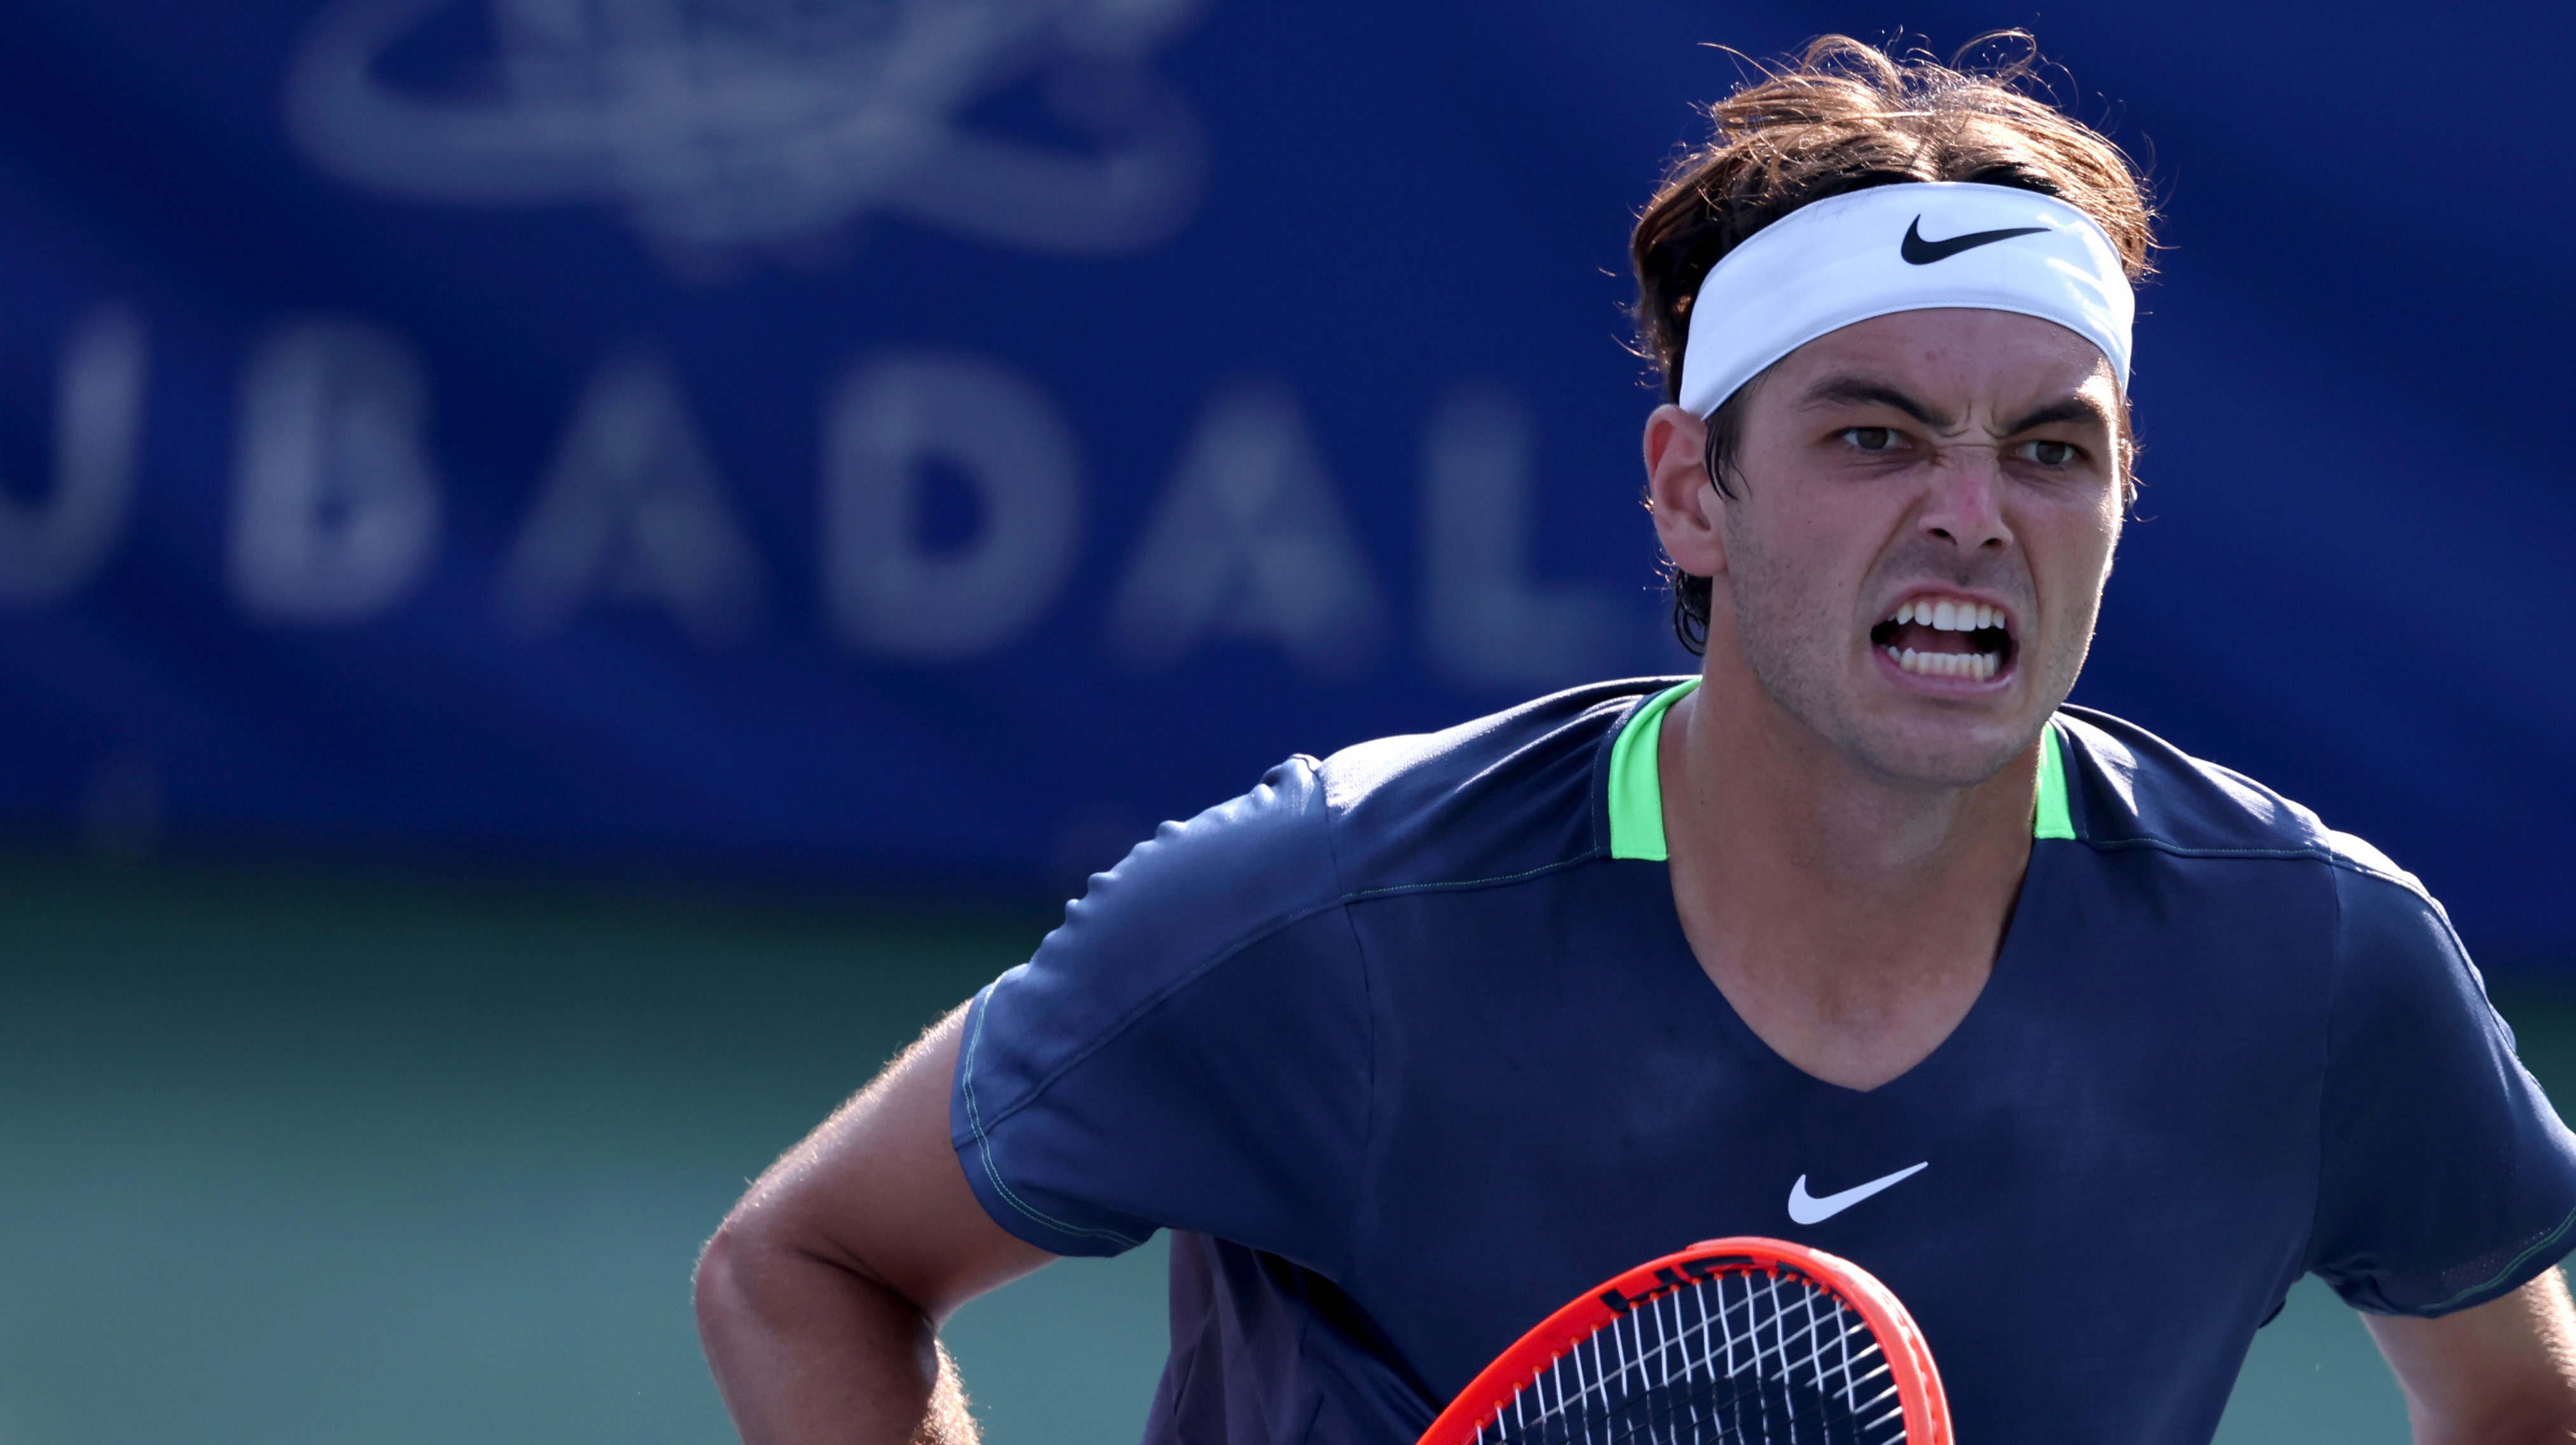 Taylor Fritz wins twice to reach the DC semifinals, Frances Tiafoe loses in the quarters